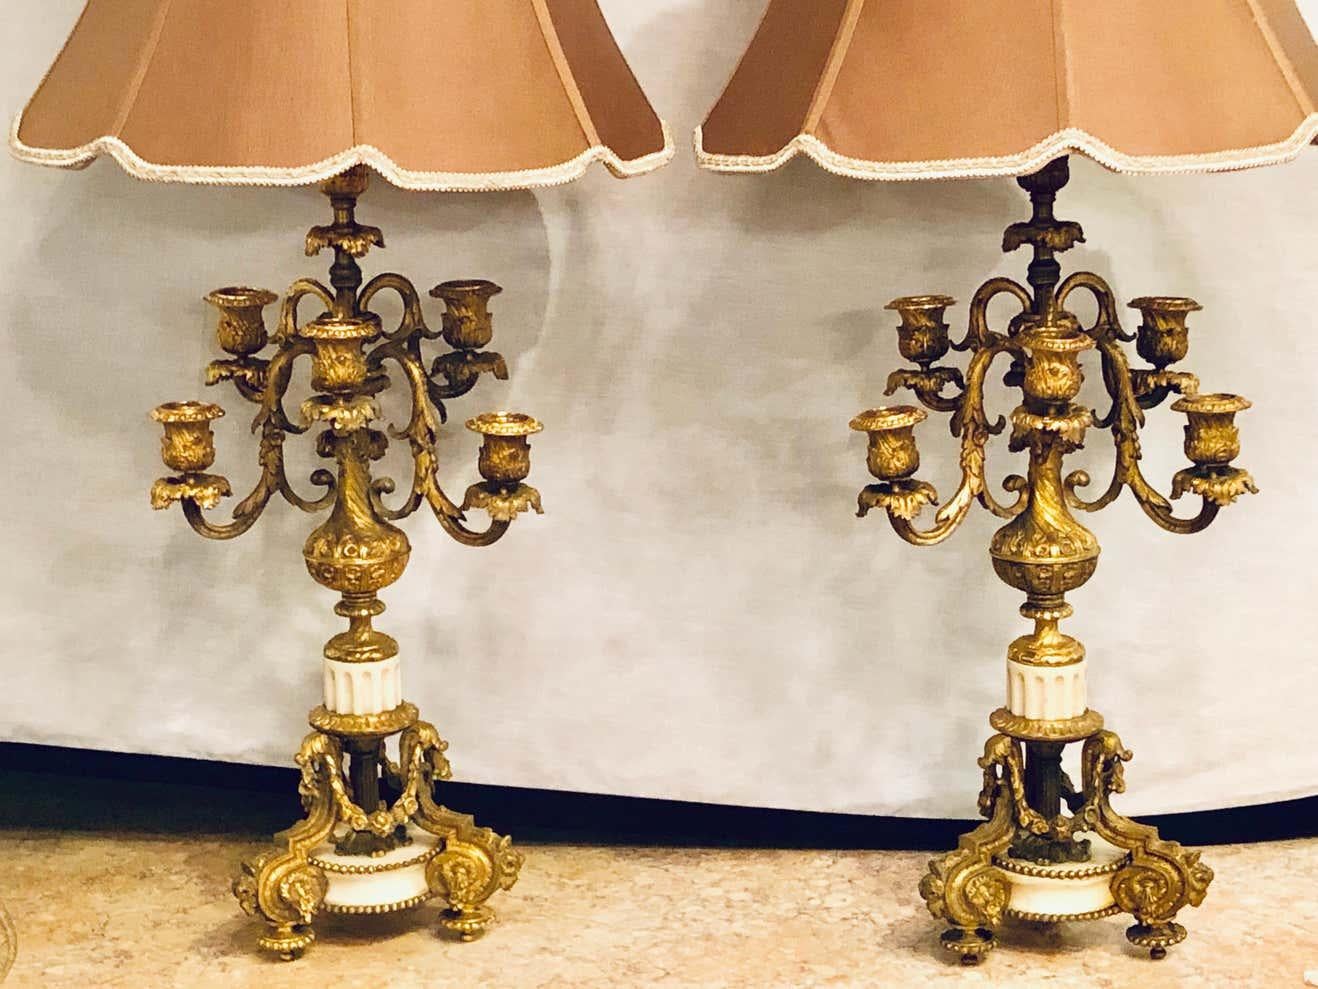 Pair of 19th Century Doré Bronze 7-Light Marble Base Candelabras Mounted as Lamp For Sale 11